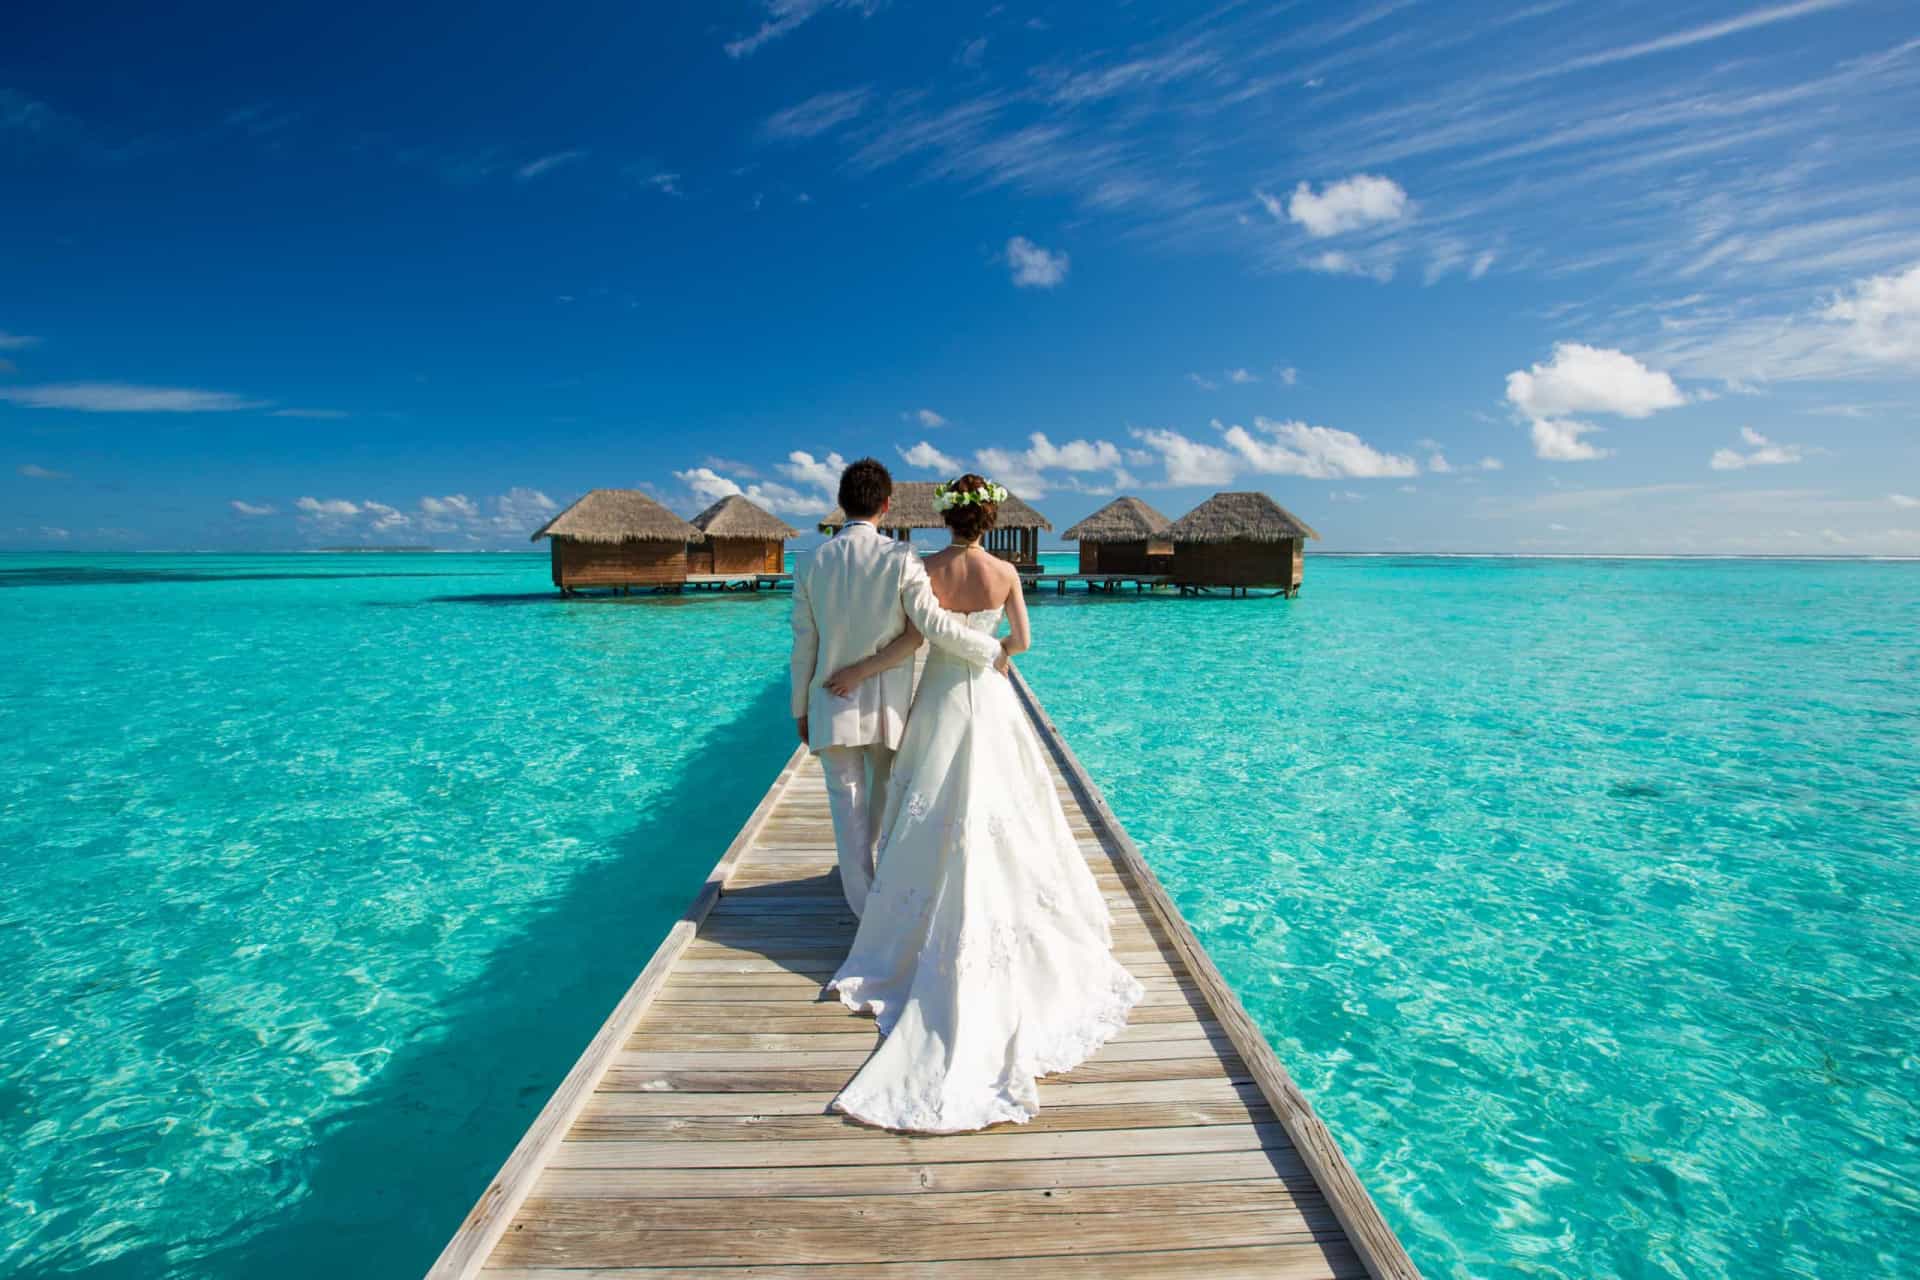 <p>It's no surprise that the Maldives is frequented by the rich and famous. It's often used for weddings and honeymoons. Recently, stars such as Taylor Swift, Gwyneth Paltrow, and Madonna have been spotted here.</p>